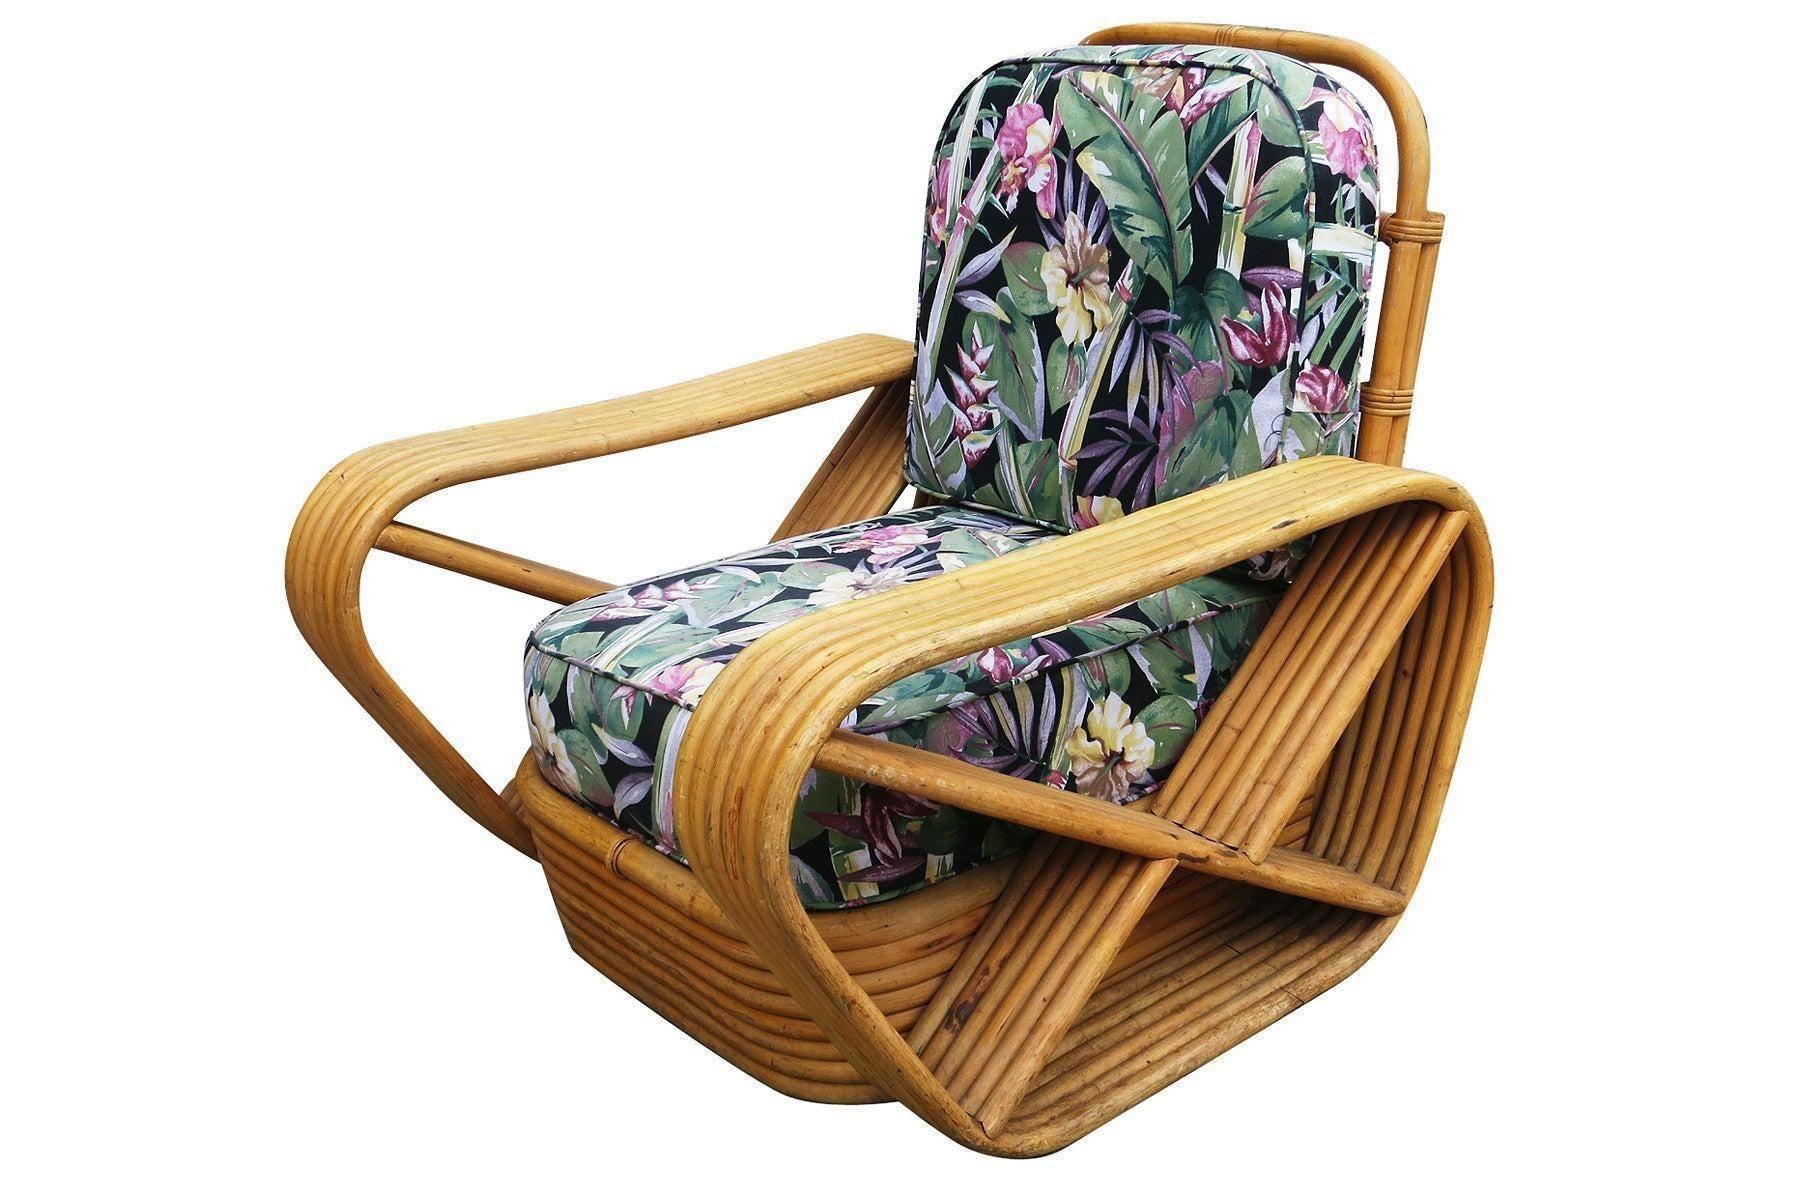 Designed in the manner of Paul Frankl, this six-strand, rattan lounge chair features square pretzel arms and a Classic stacked base. Included is the matching stacked rattan ottoman.
Measures:
Chair: 31